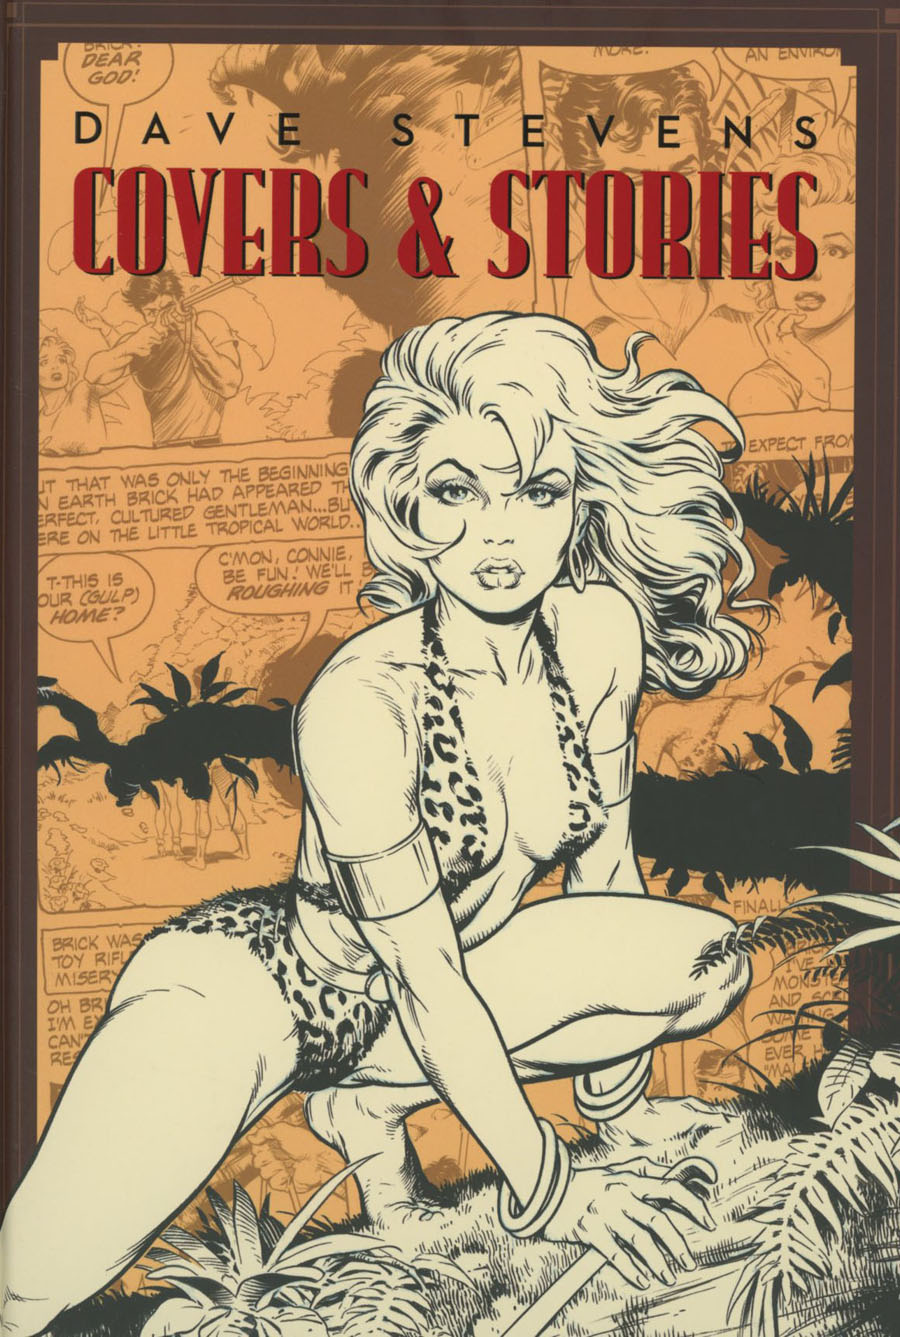 Dave Stevens Covers & Stories HC SDCC 2012 Variant Cover